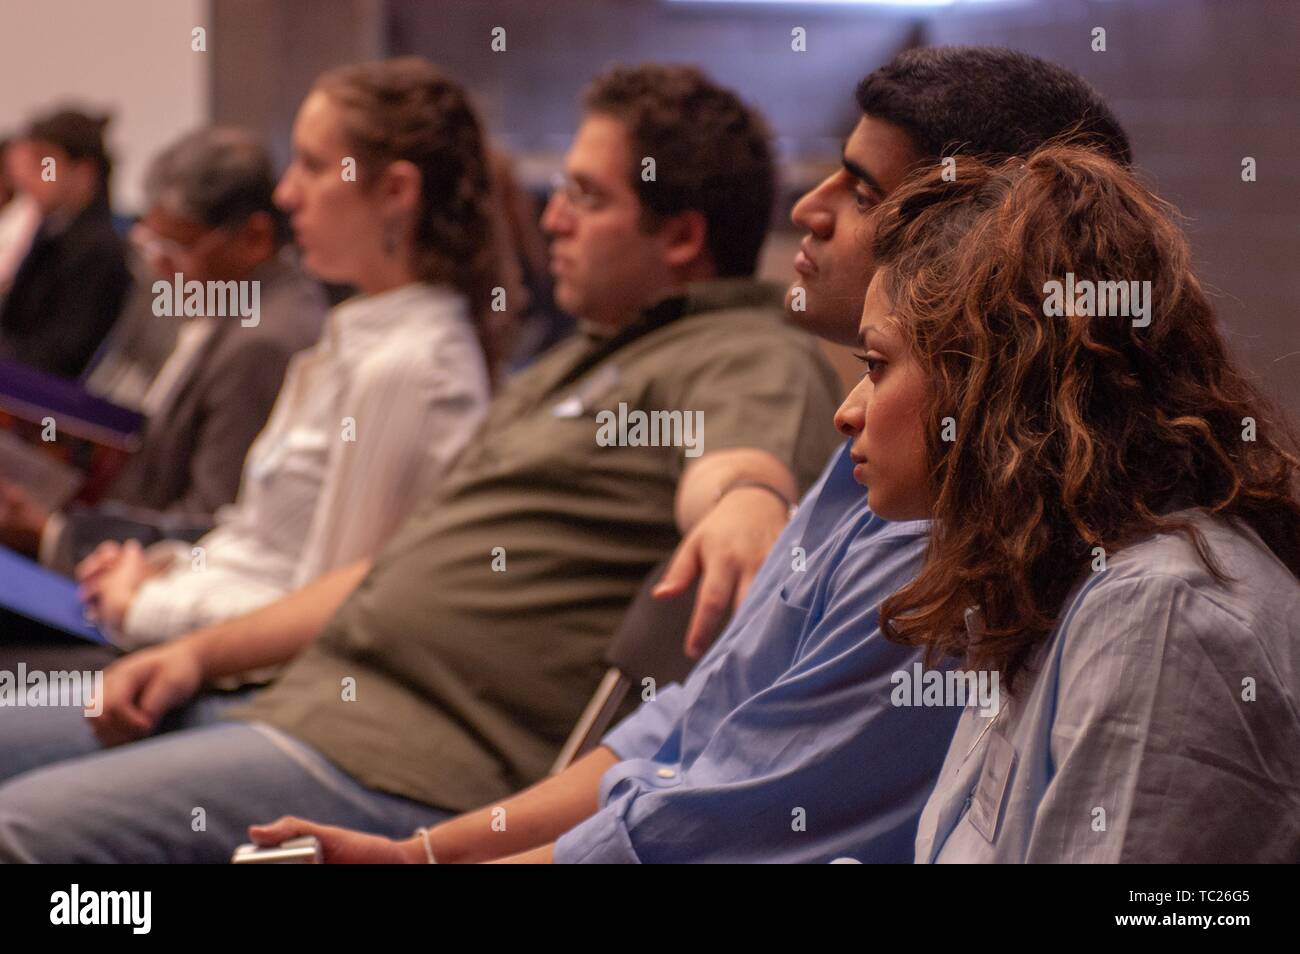 Profile shot of seated people, from the waist up, likely during an admission event at the Johns Hopkins University, Baltimore, Maryland, April 10, 2004. From the Homewood Photography Collection. () Stock Photo